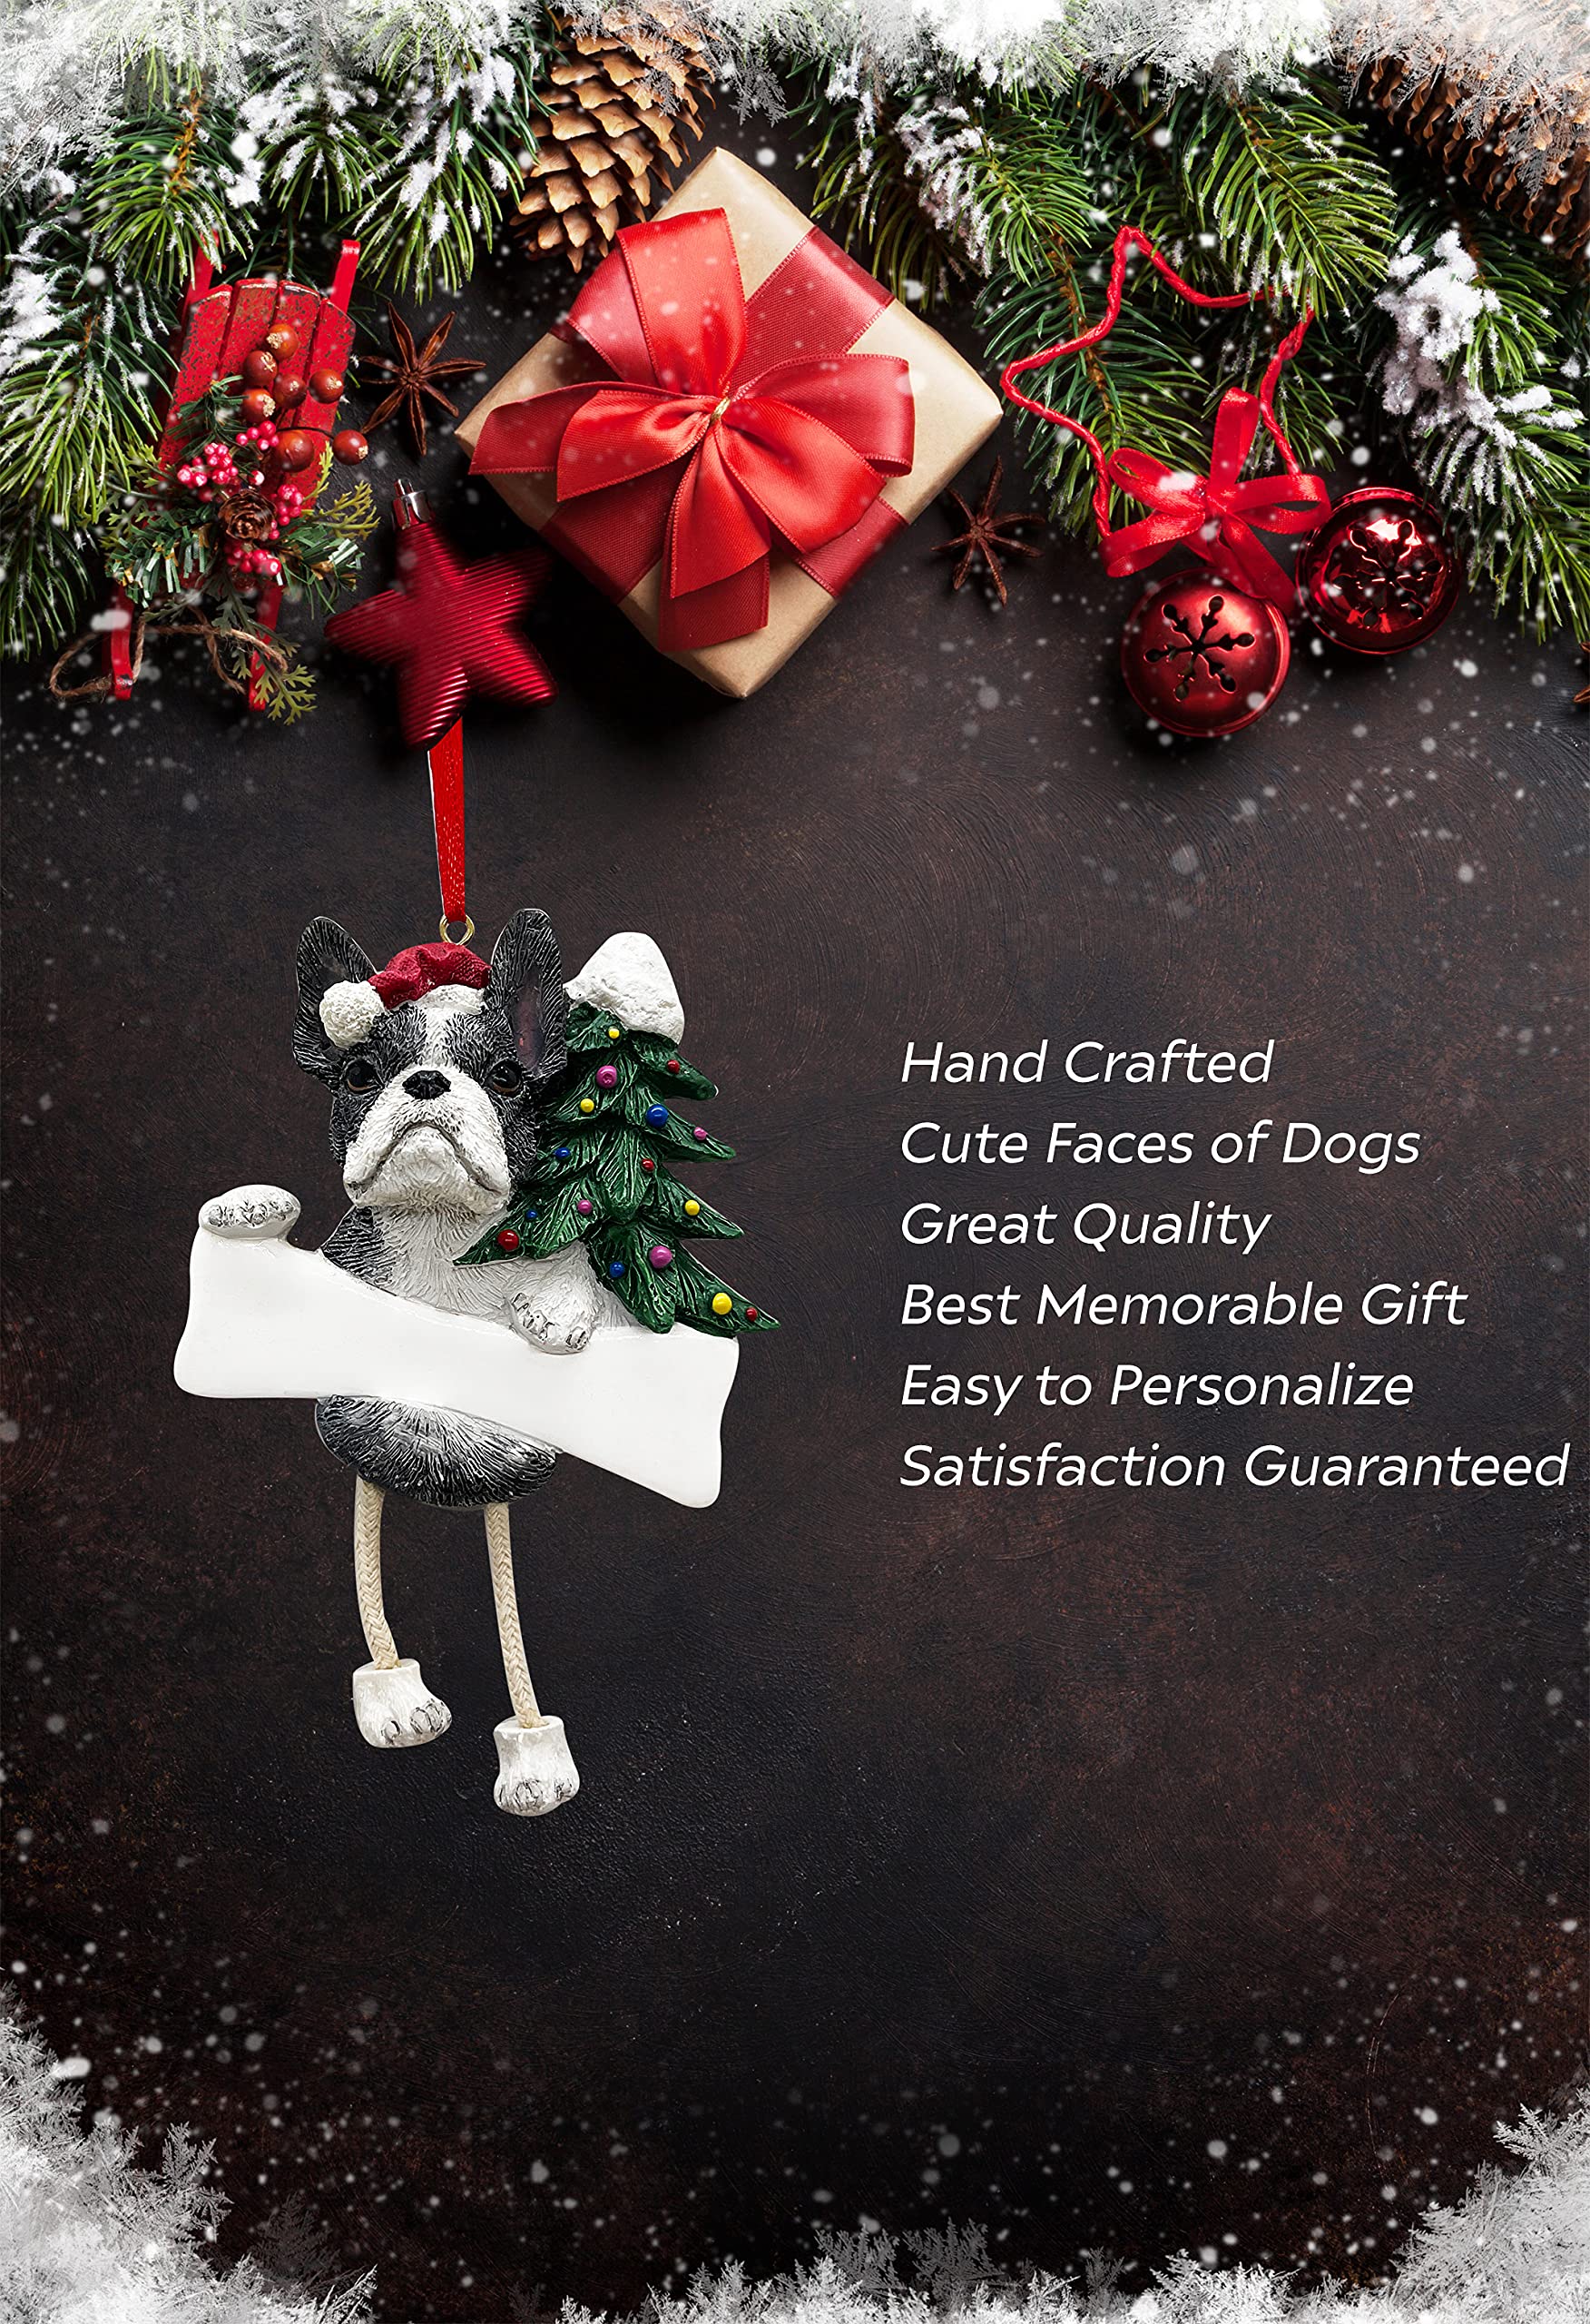 Boston Terrier Ornament with Unique "Dangling Legs" Hand Painted and Easily Personalized Christmas Ornament